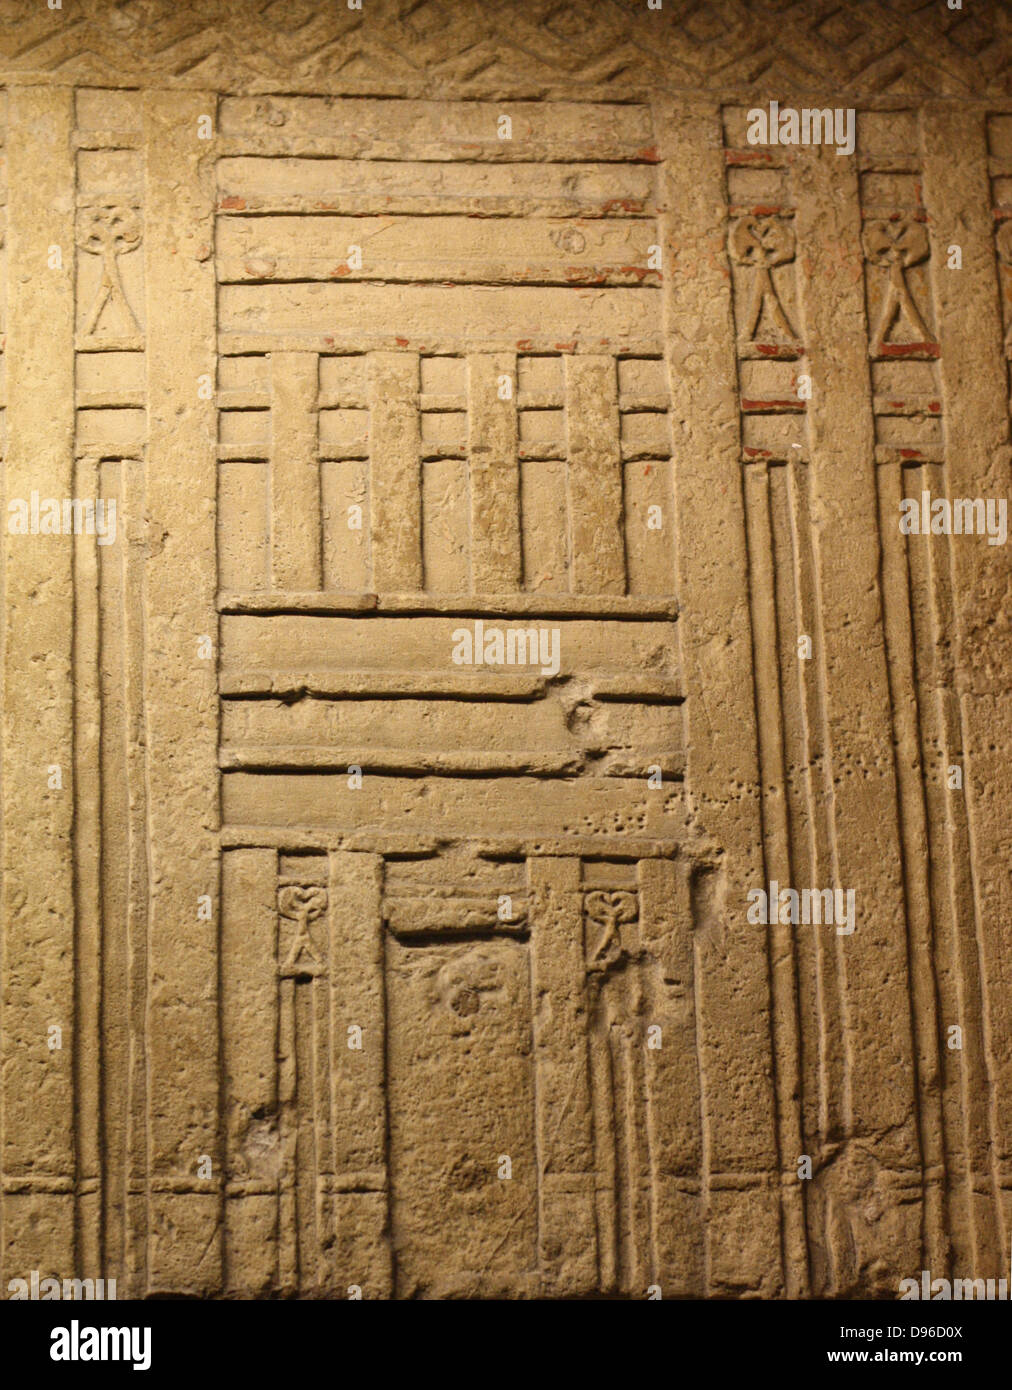 False door of Tjetji and his wife Debet. Limestone, Fourth or Fifth Dynasty, about 2500-2400 BC. From the tomb of Tjetji at Giza. This door comes from the same tomb. False doors were the main place for making offerings in the Old Kingdom. One of the dead person's spirits would pass through the door between the worlds of the dean and the living. The Central panel of this door shoes Tjeji and Debet receiving offerings, They appear on the side panels with their children. Stock Photo